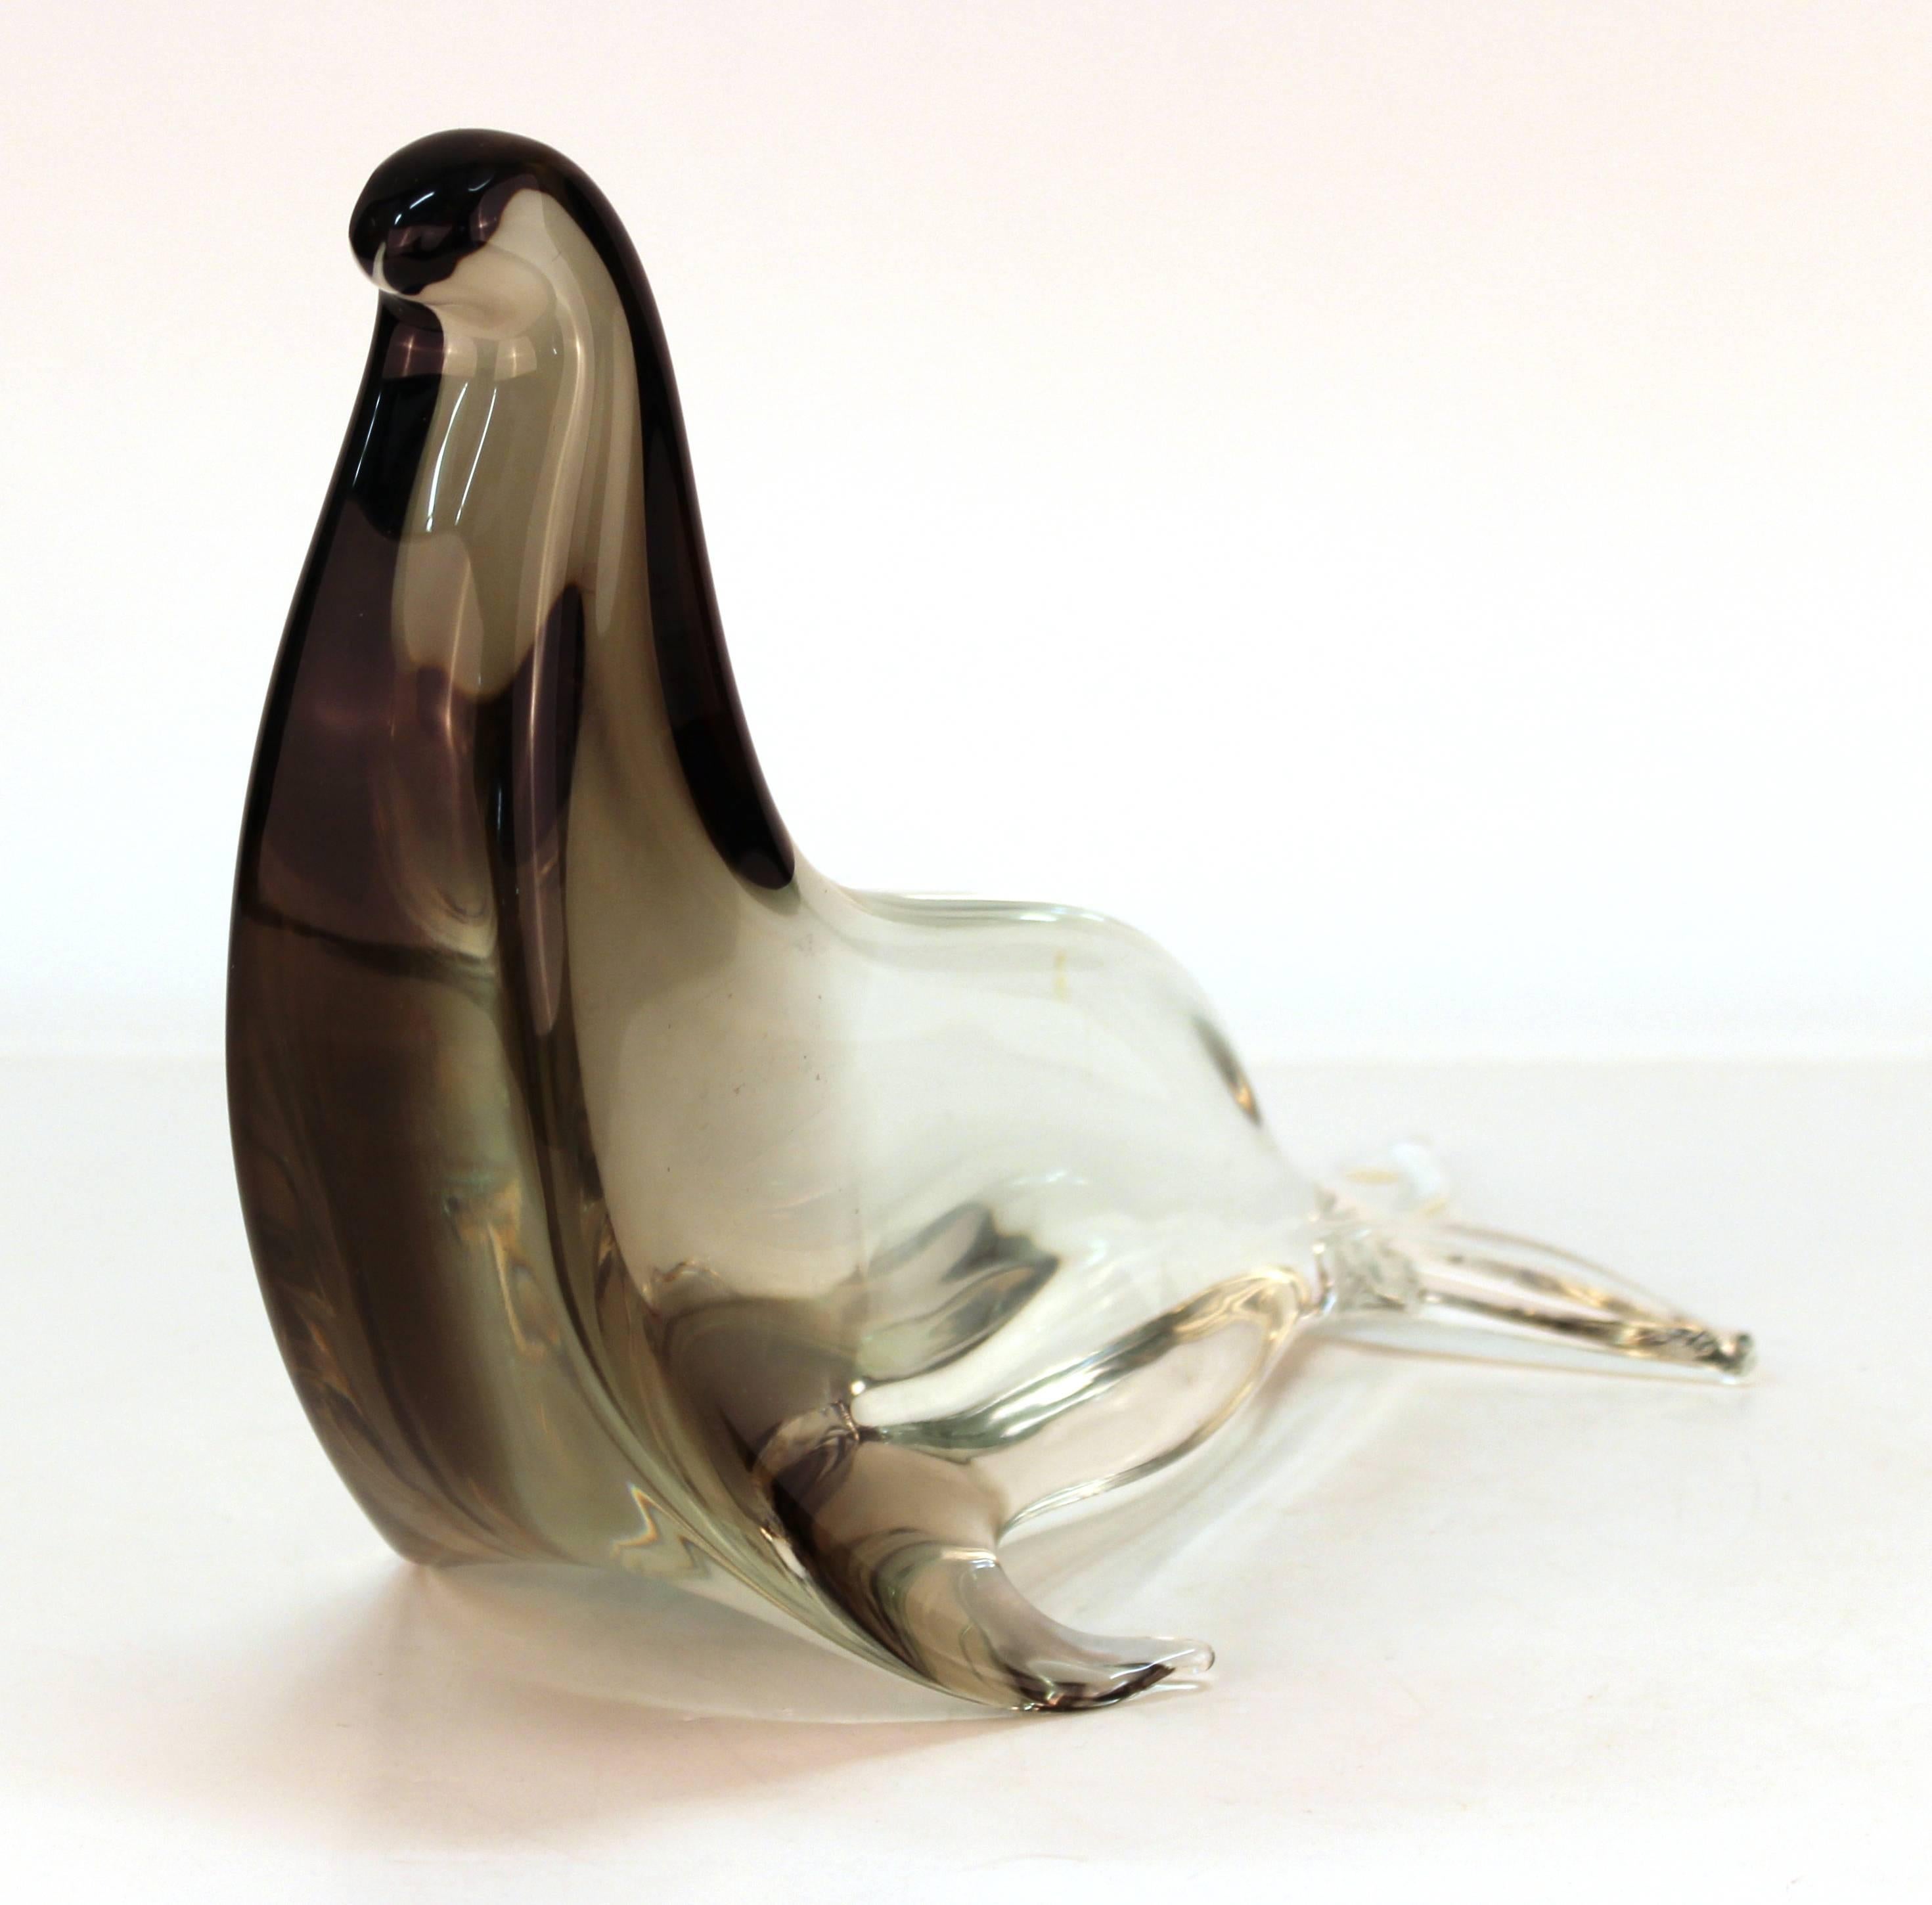 A Mid-Century Modern Italian art glass sculpture in shape of a seal, made by Licio Zanetti in partially smoked glass. The piece is signed on the bottom and is in great vintage condition.